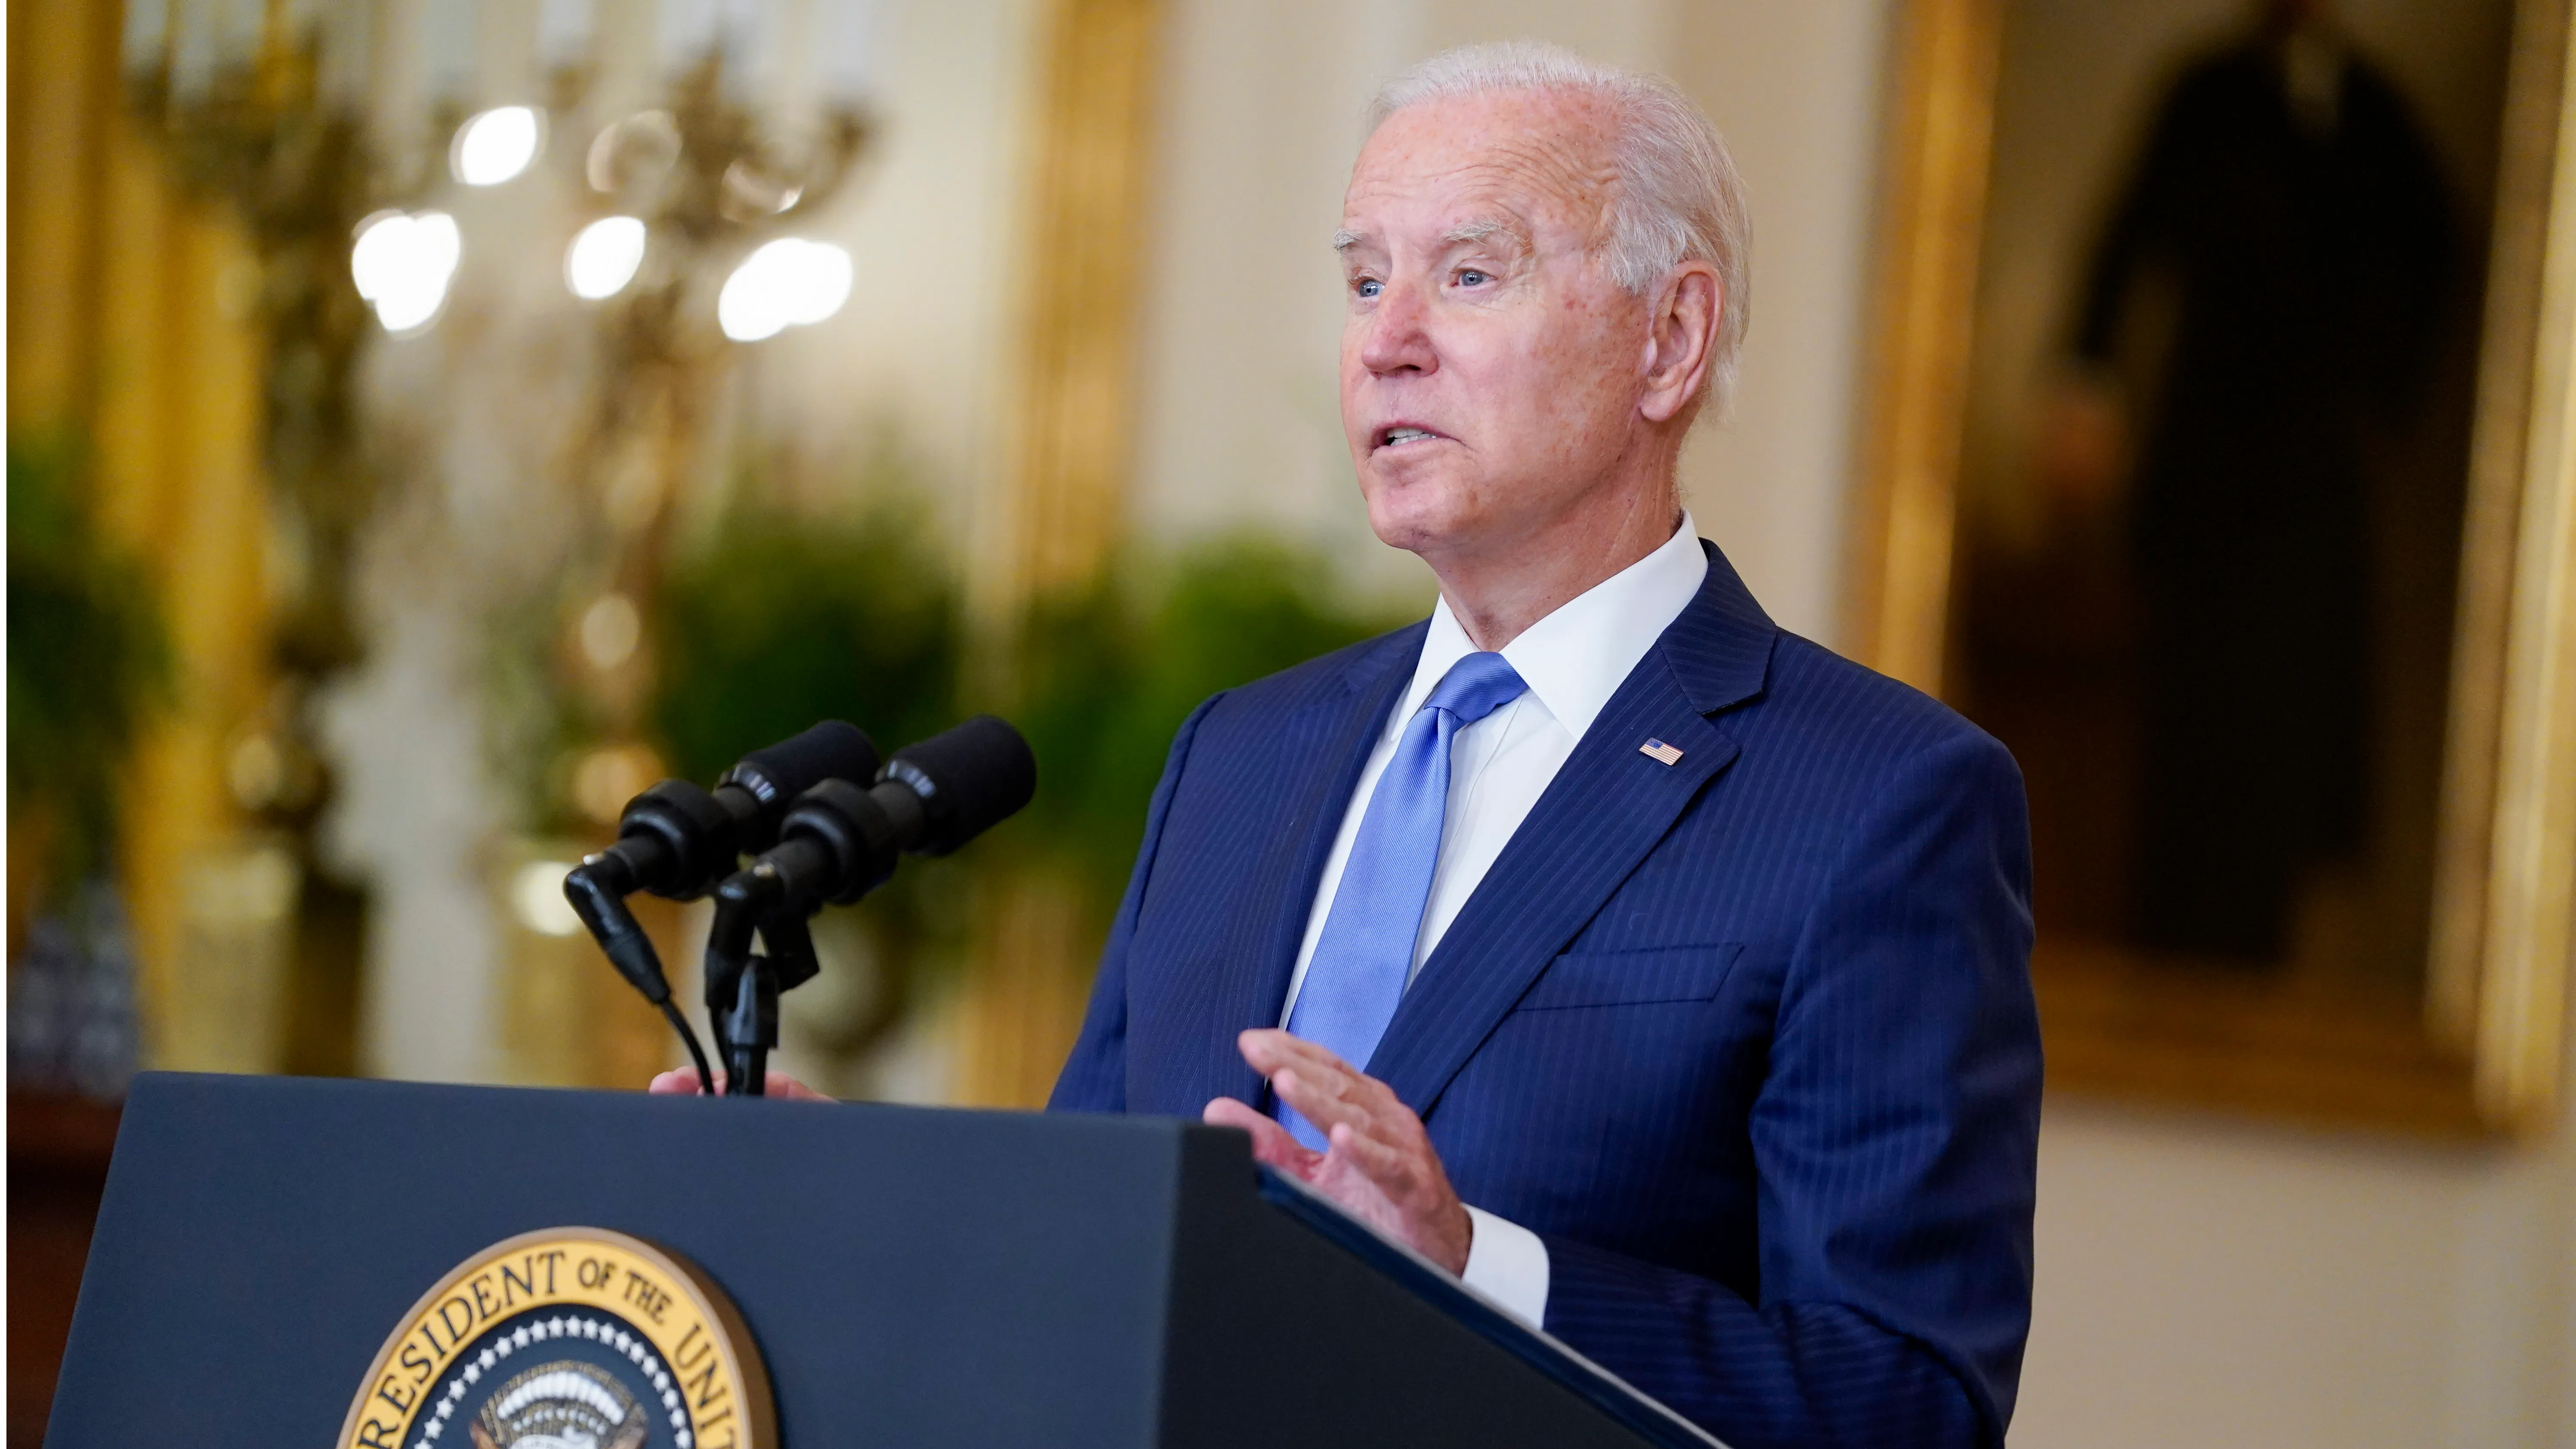 Biden administration to extend refugee cap to 125,000 for next fiscal year: Reports